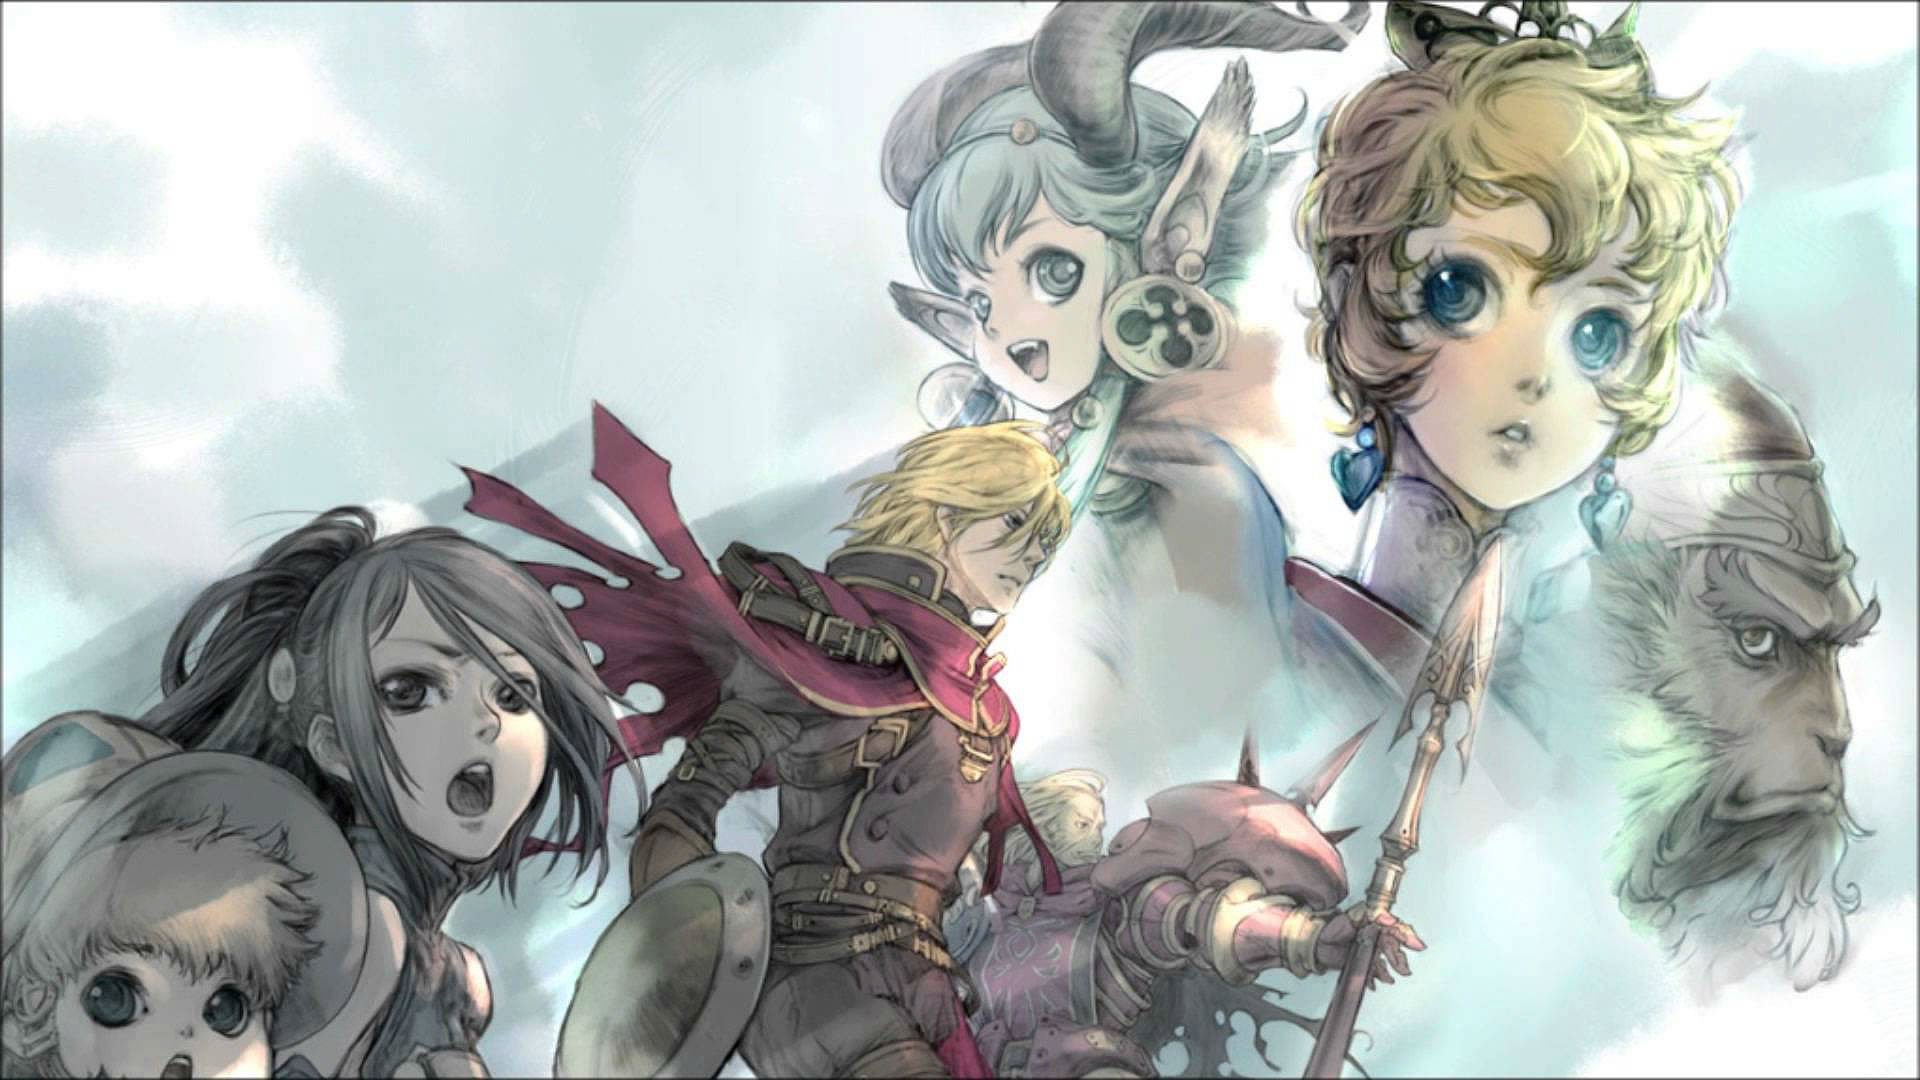 download radiant historia perfect chronology 3ds